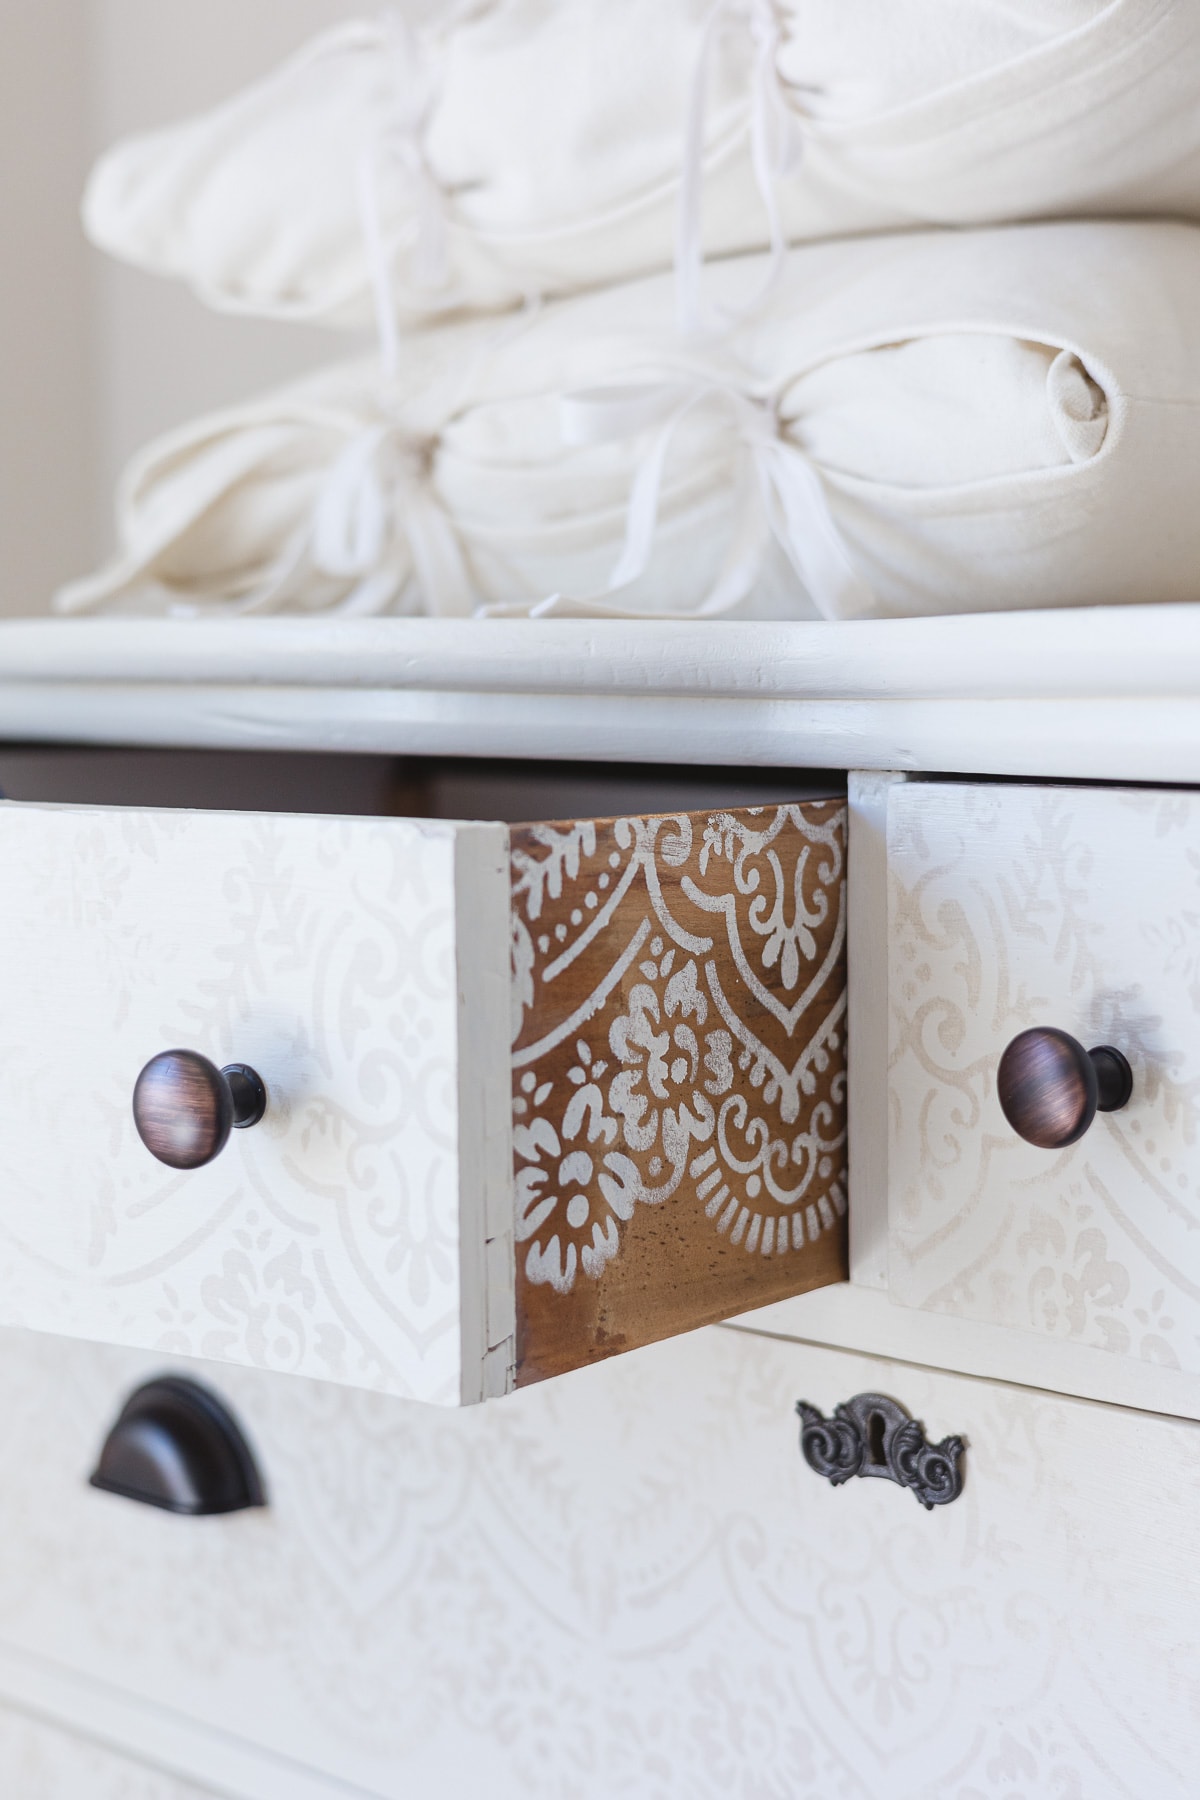 A drawer of a painted dresser pulled out to reveal white stenciling on the wood interior.